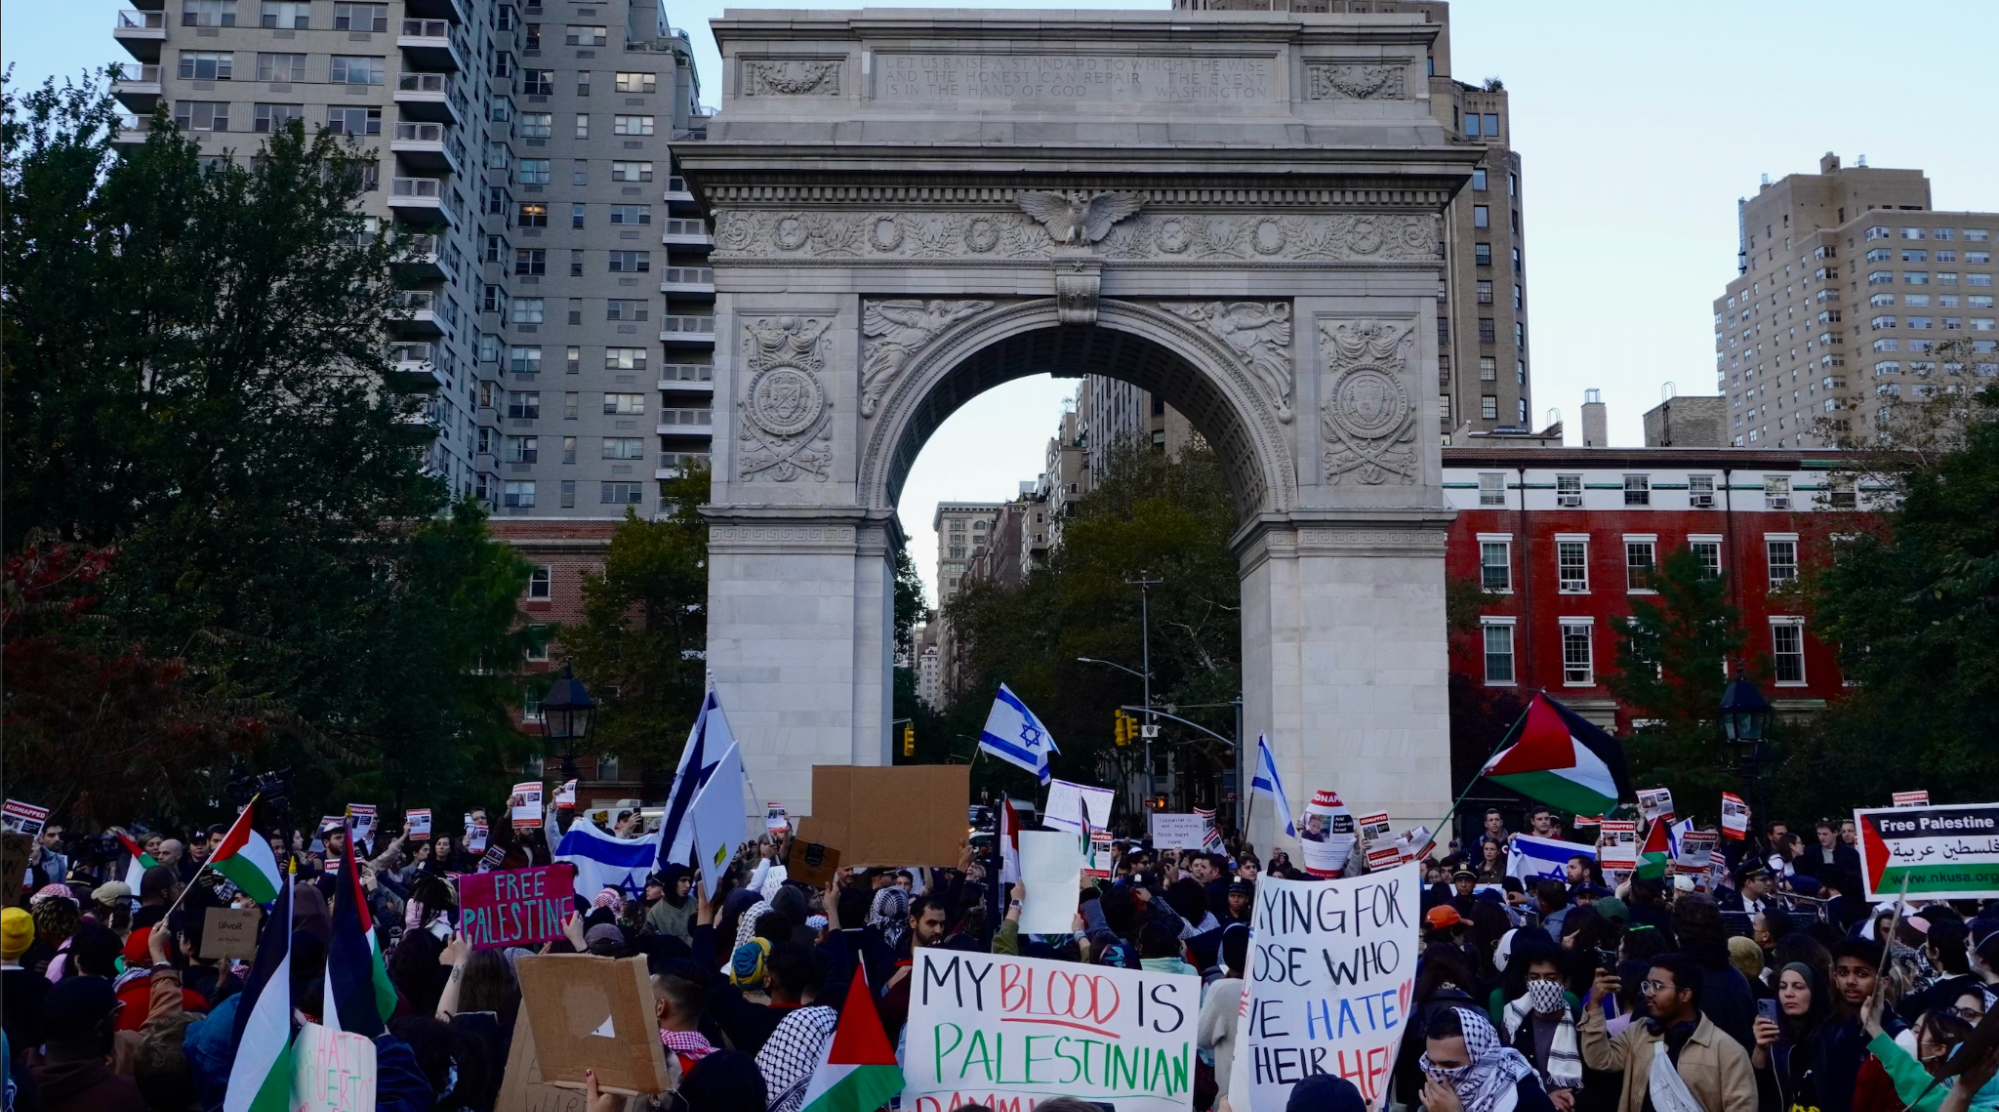 Israeli flags and Palestinian protest signs held up under the Washington Square Arch